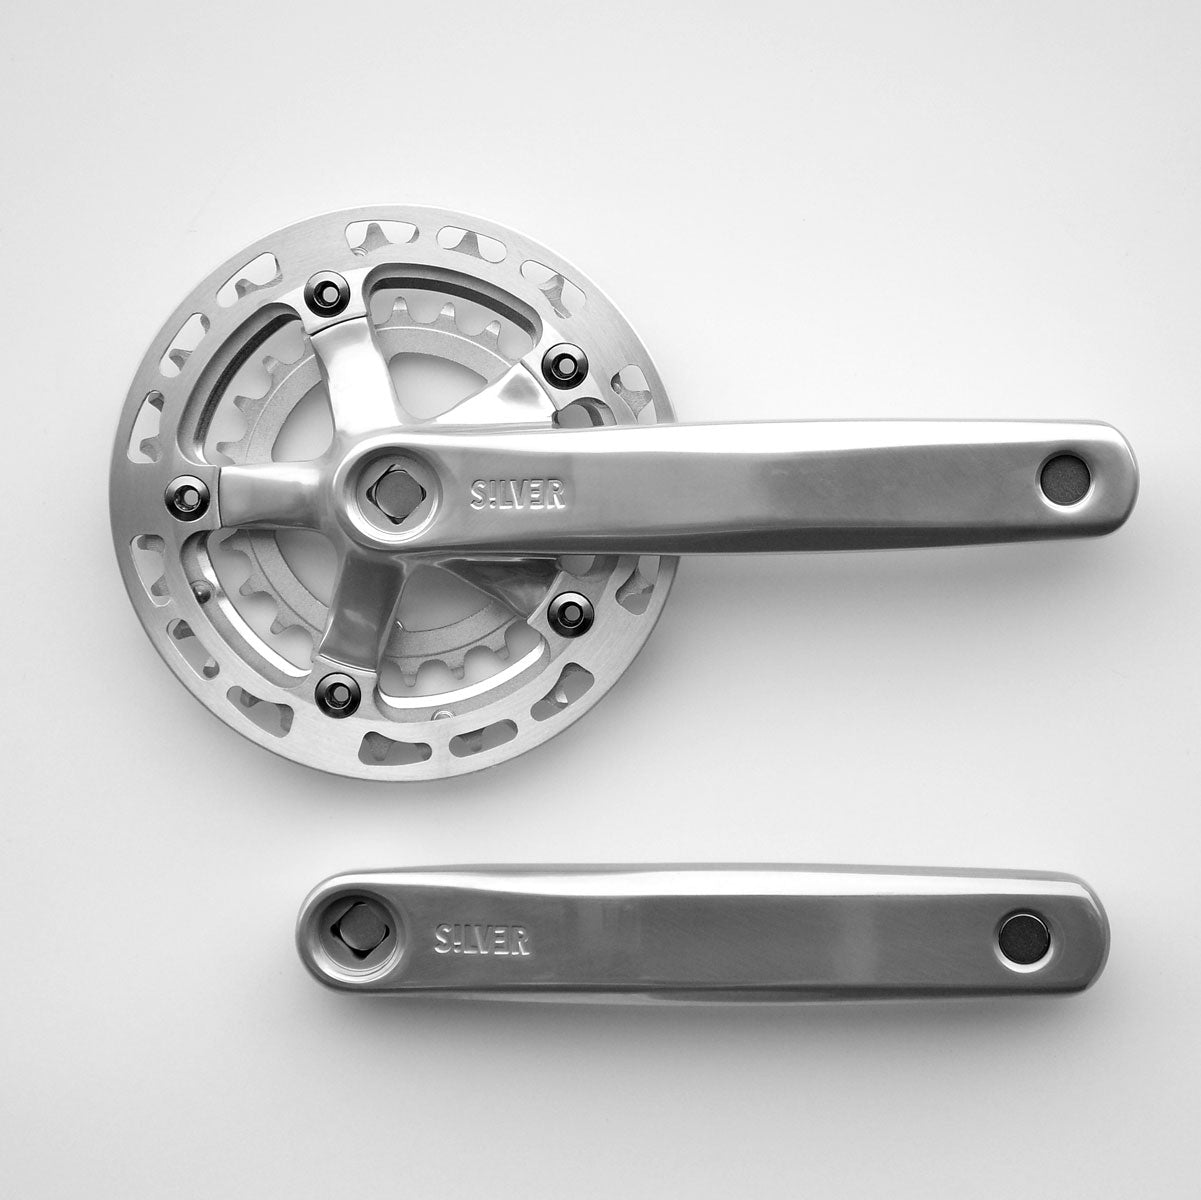 Crank - Silver - low/low double steel 34x24 (with guard)